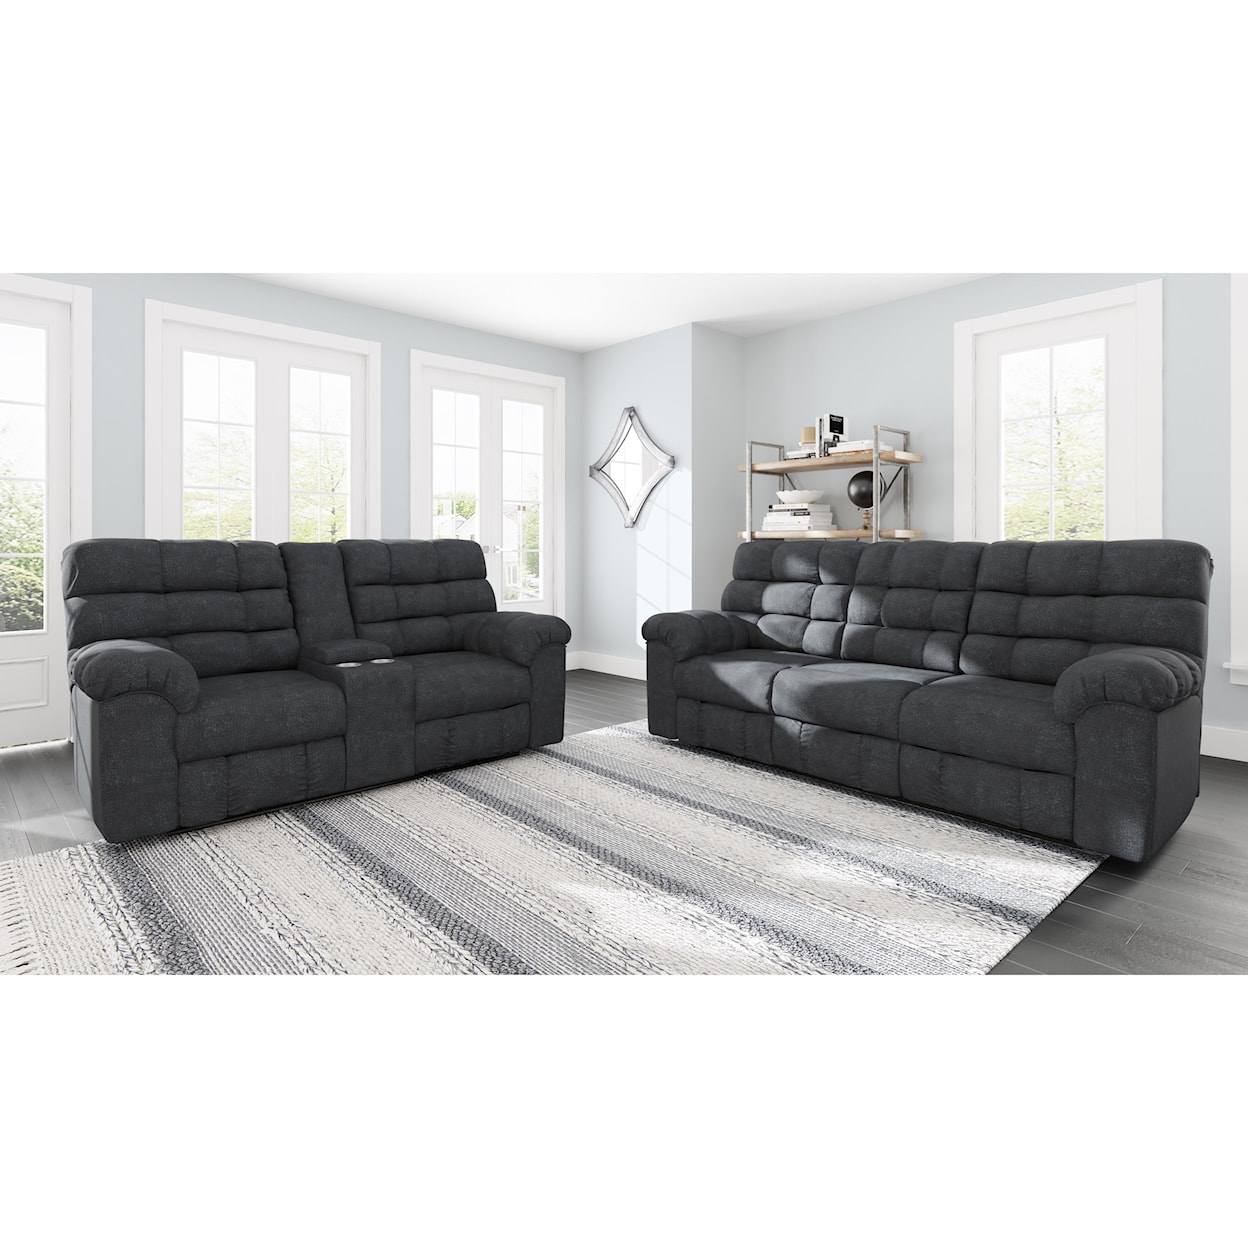 Signature Design by Ashley Furniture Wilhurst Reclining Living Room Group